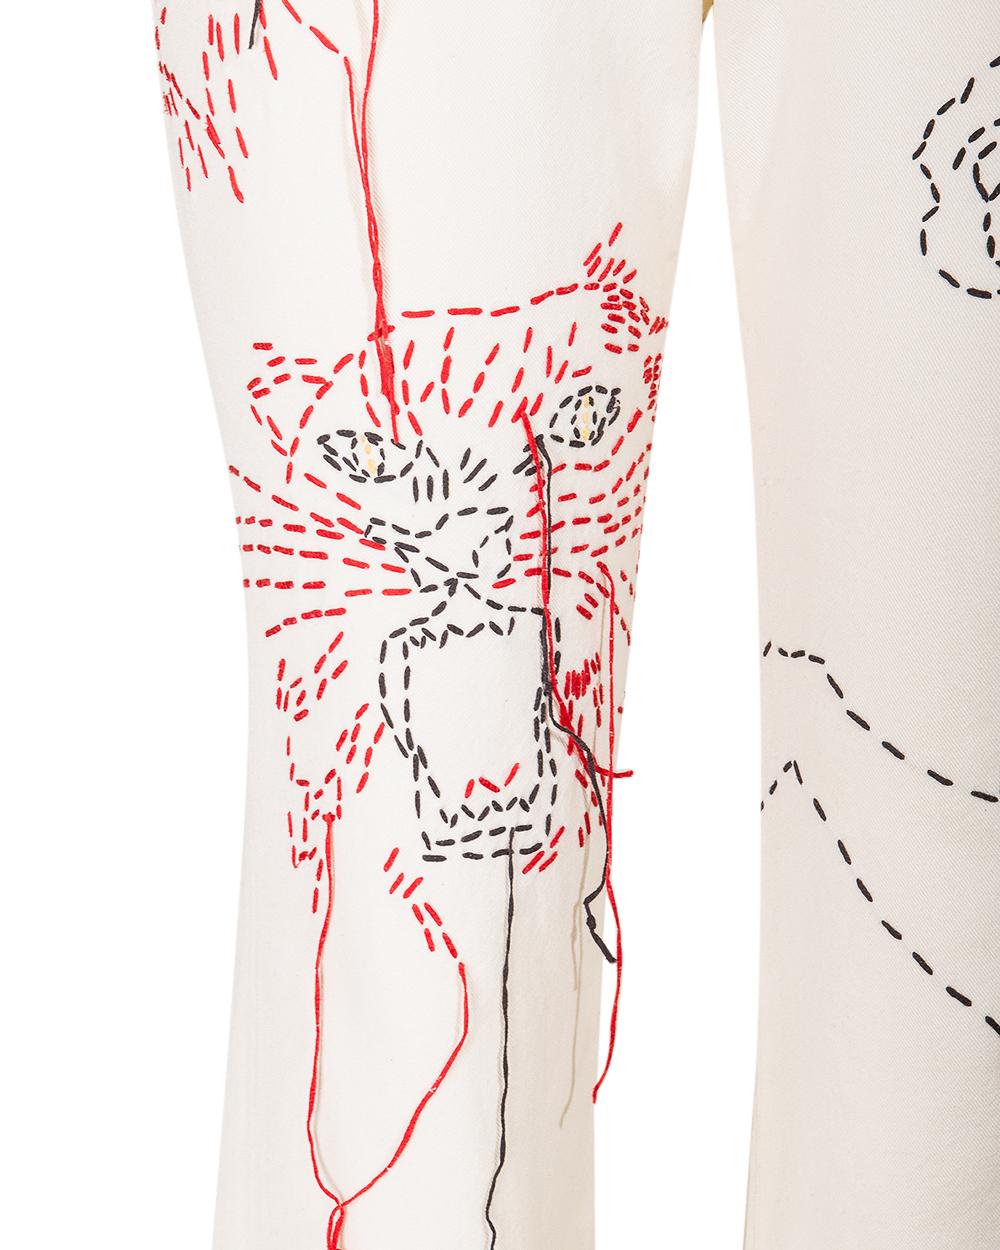 Women's S/S 2000 Chloe by Stella McCartney Cream Jeans with Embroidered Animals